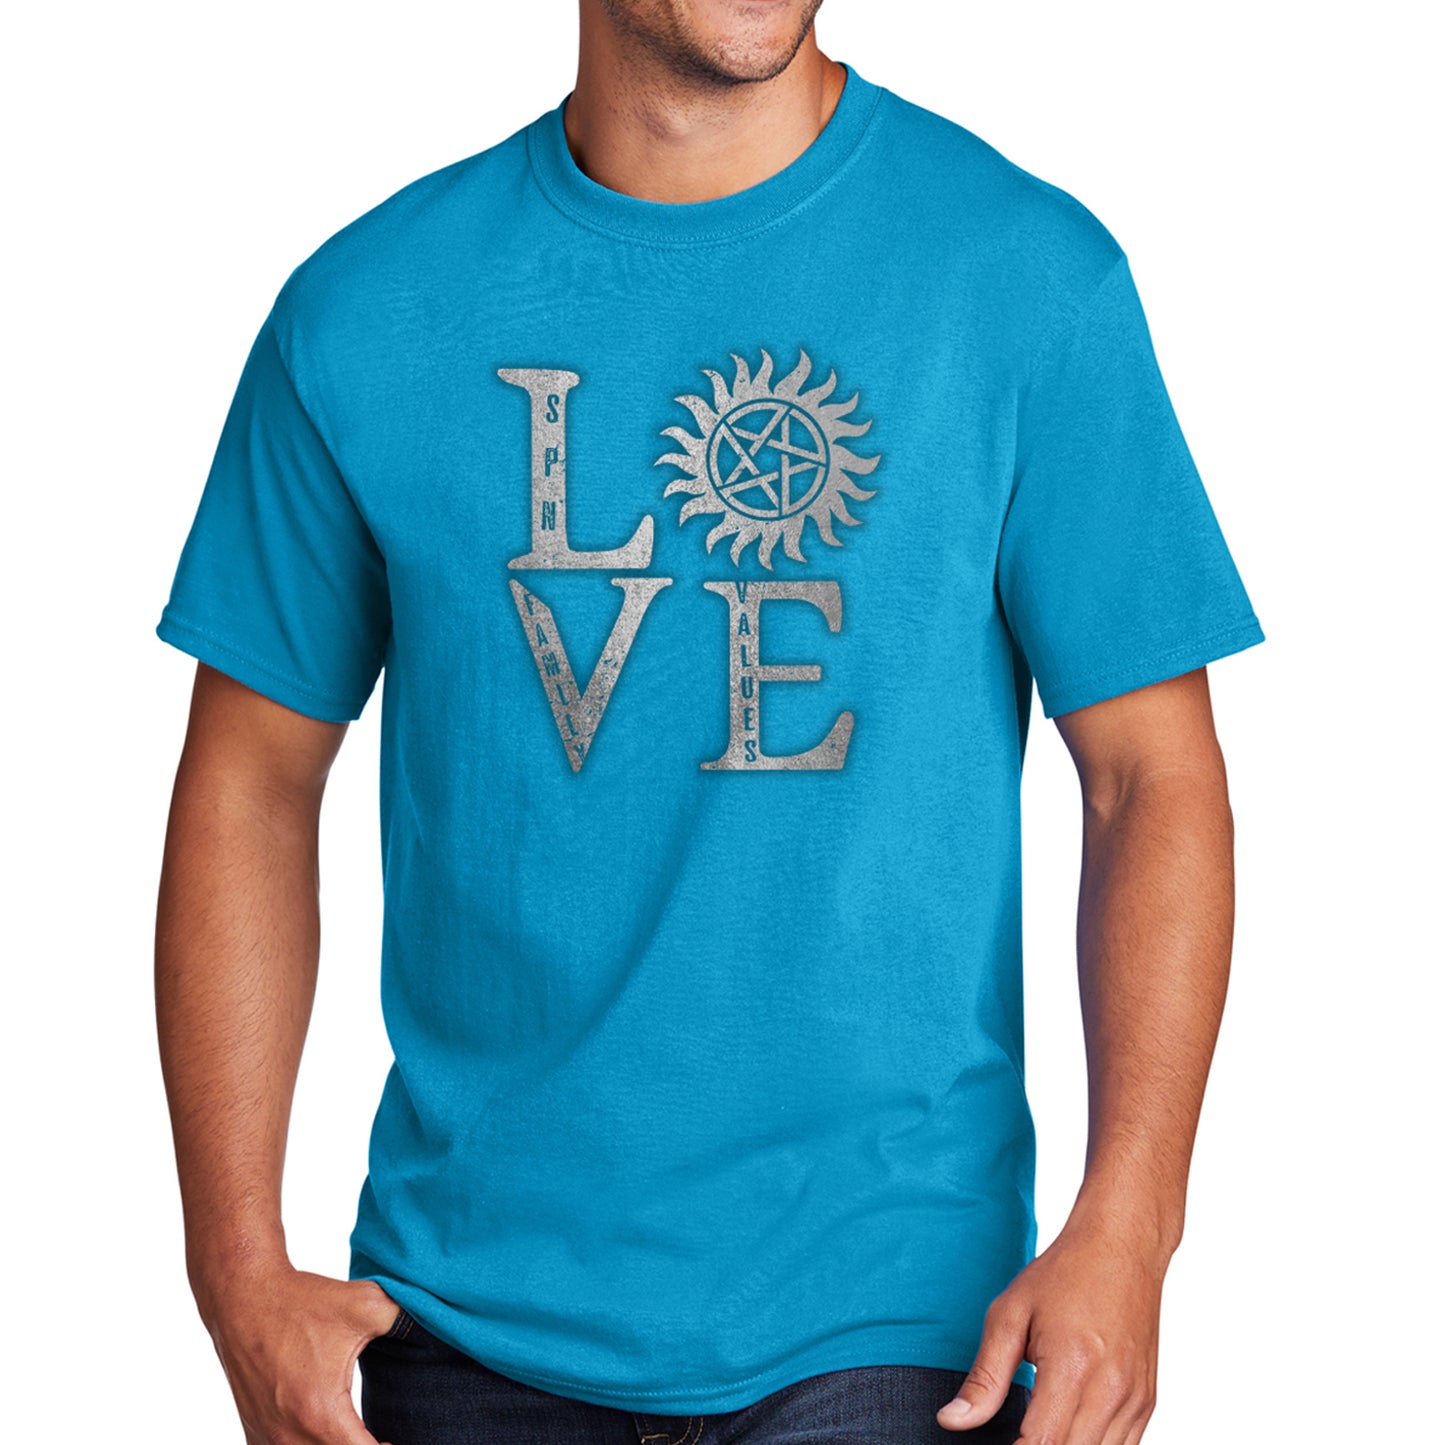 A male model wearing a turquoise t-shirt, against a white background. The front of the shirt has silver text saying "love," with the "O" replaced by the anti-possession symbol.